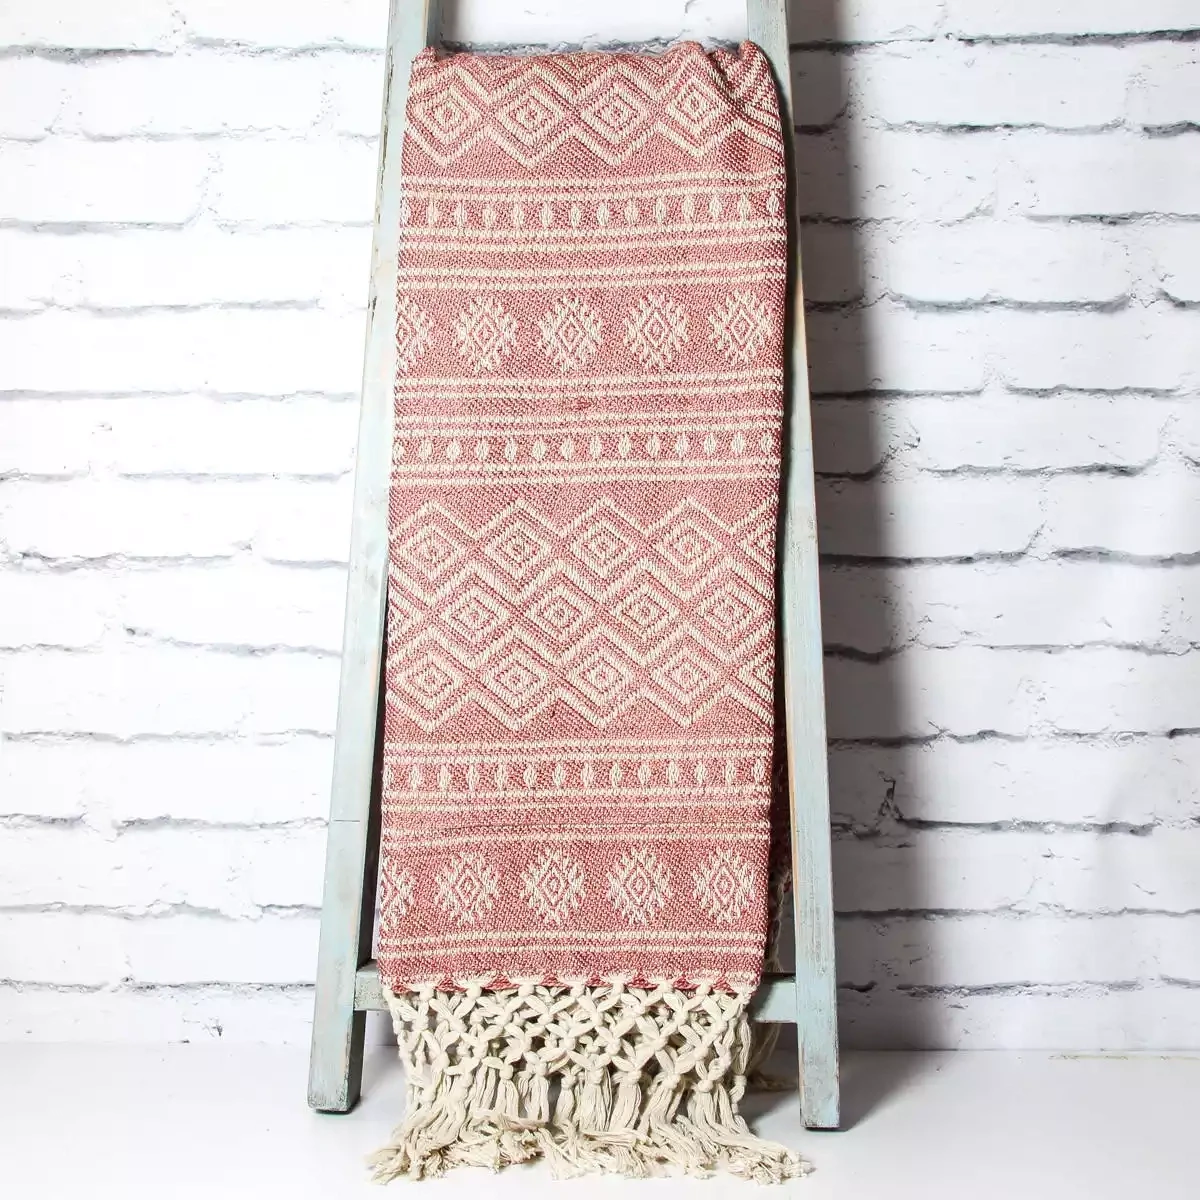 Zahira Handloom Recycled Throw with Hand Knotted Fringe - Rose - 125x150cm by Namaste